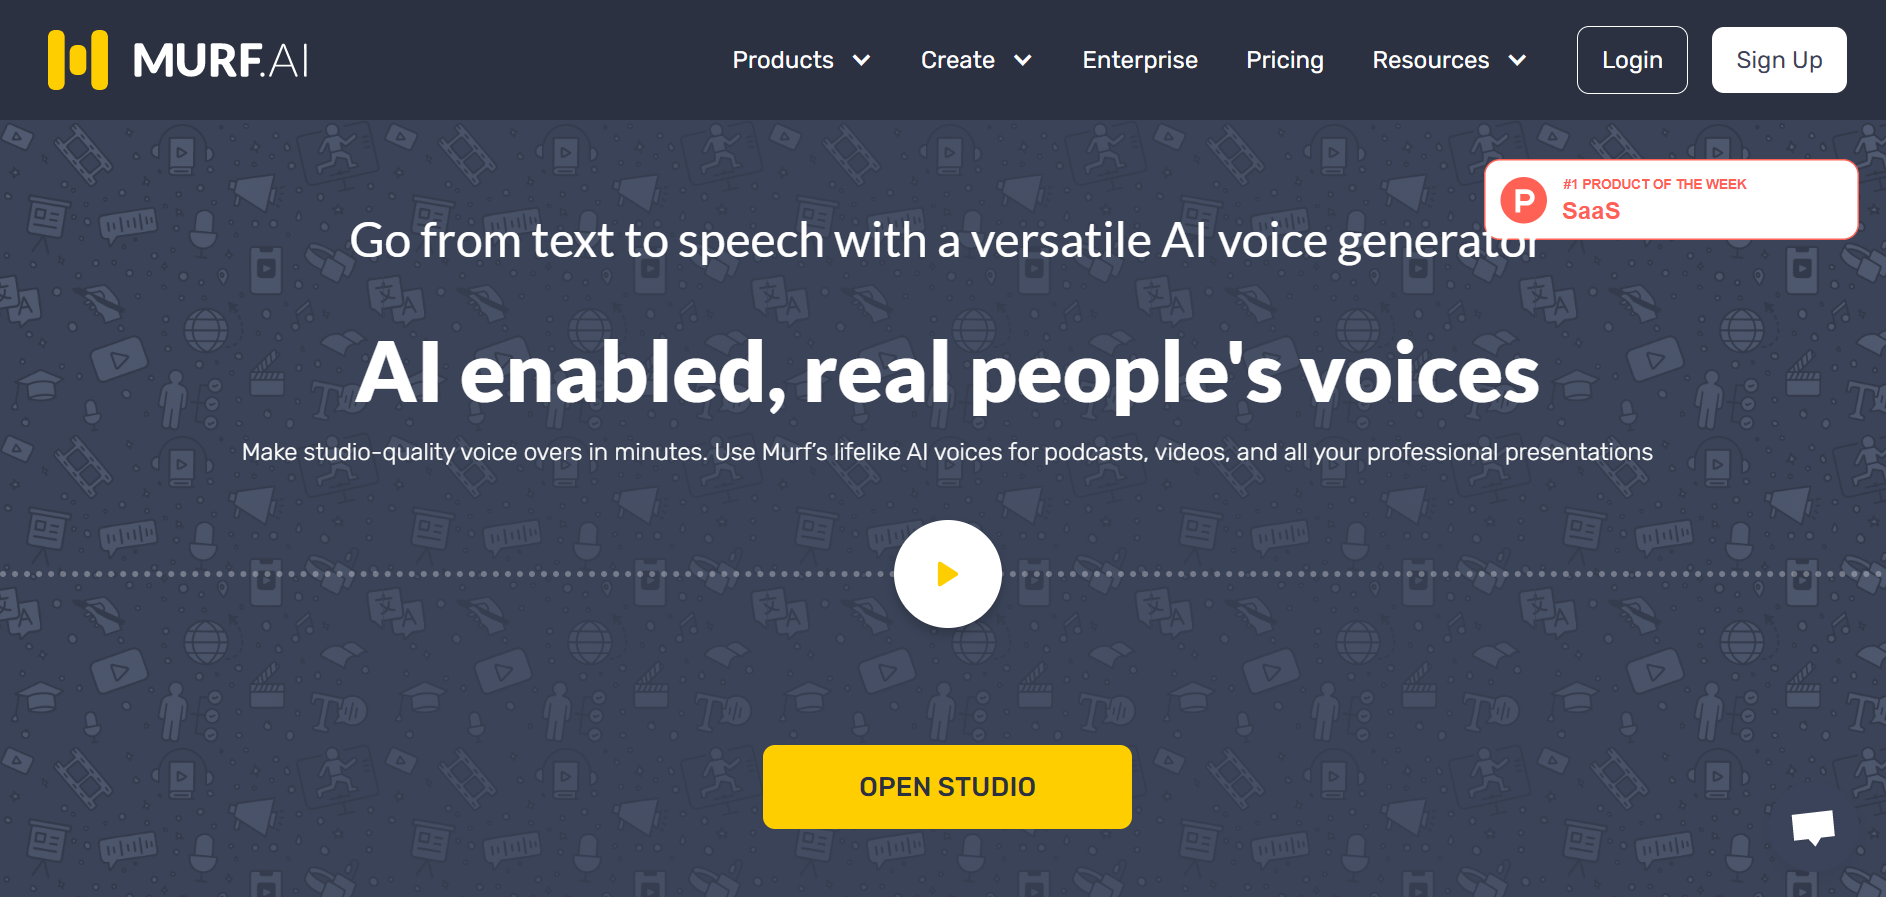 Murf.ai: The Ultimate Tool for High-Quality Voiceovers